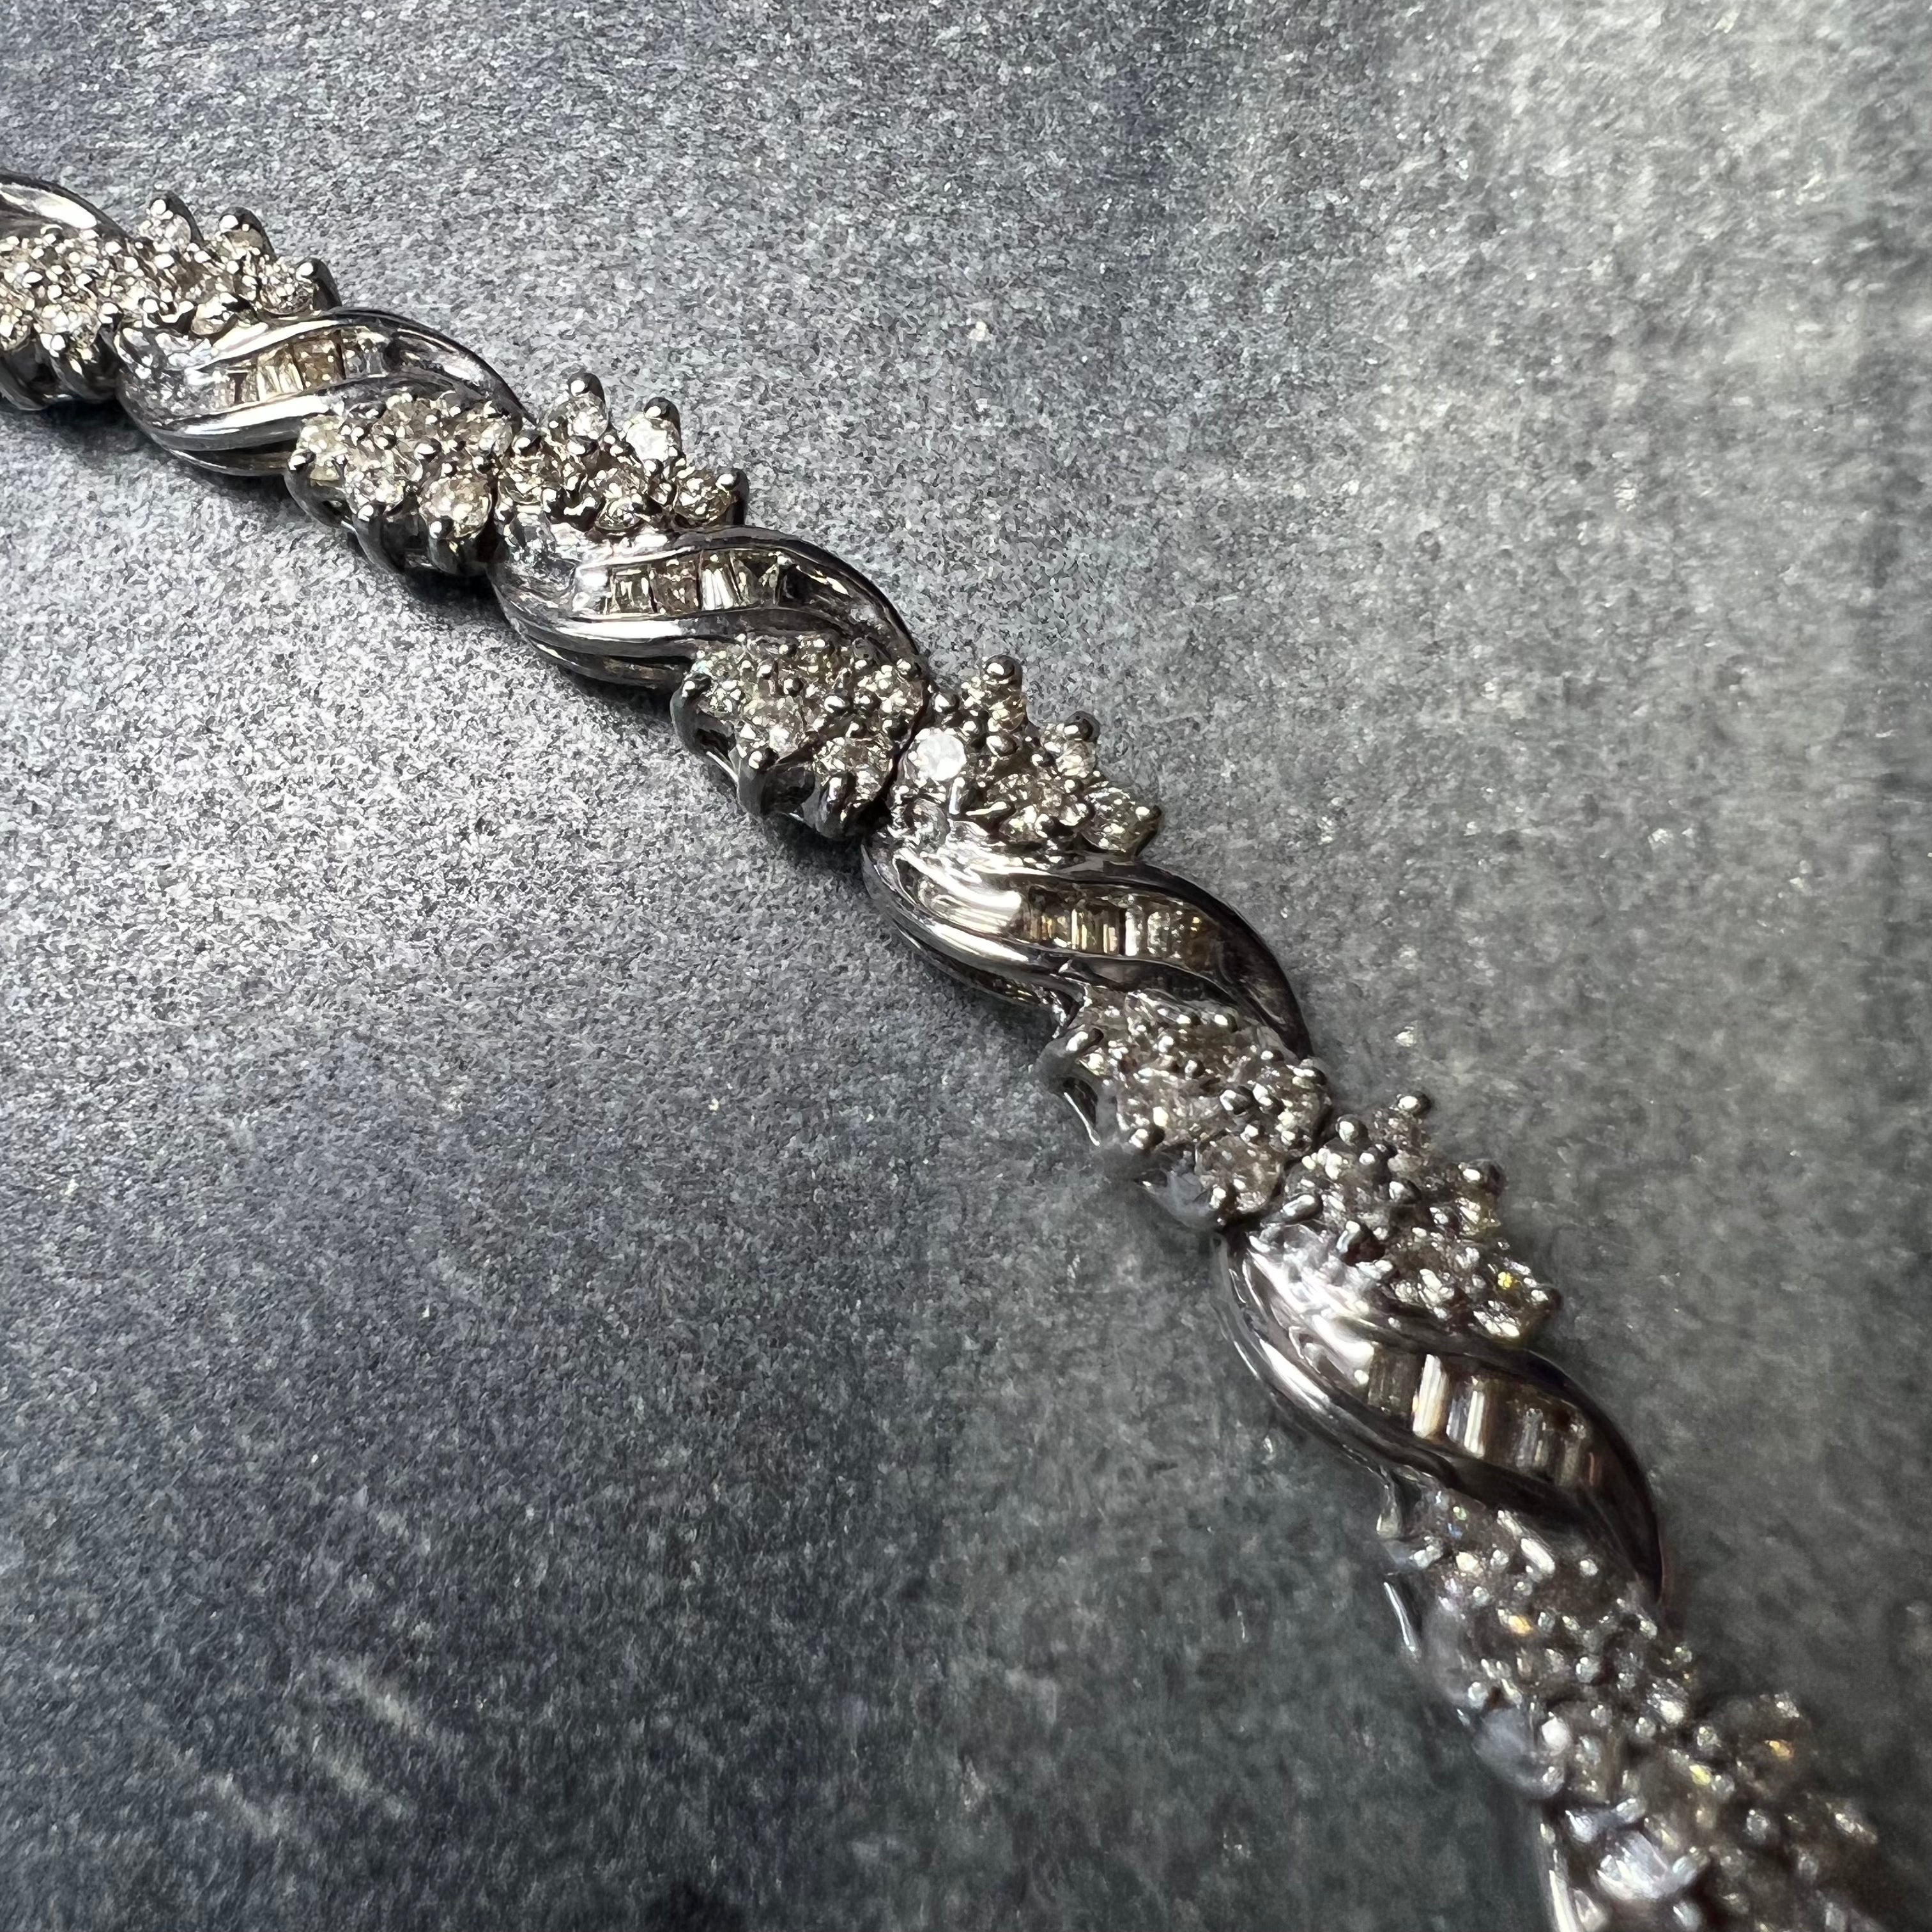 Stunning! 14K White Gold 2.5CT Round and Baguette Diamond Floral Pave Bracelet 7"